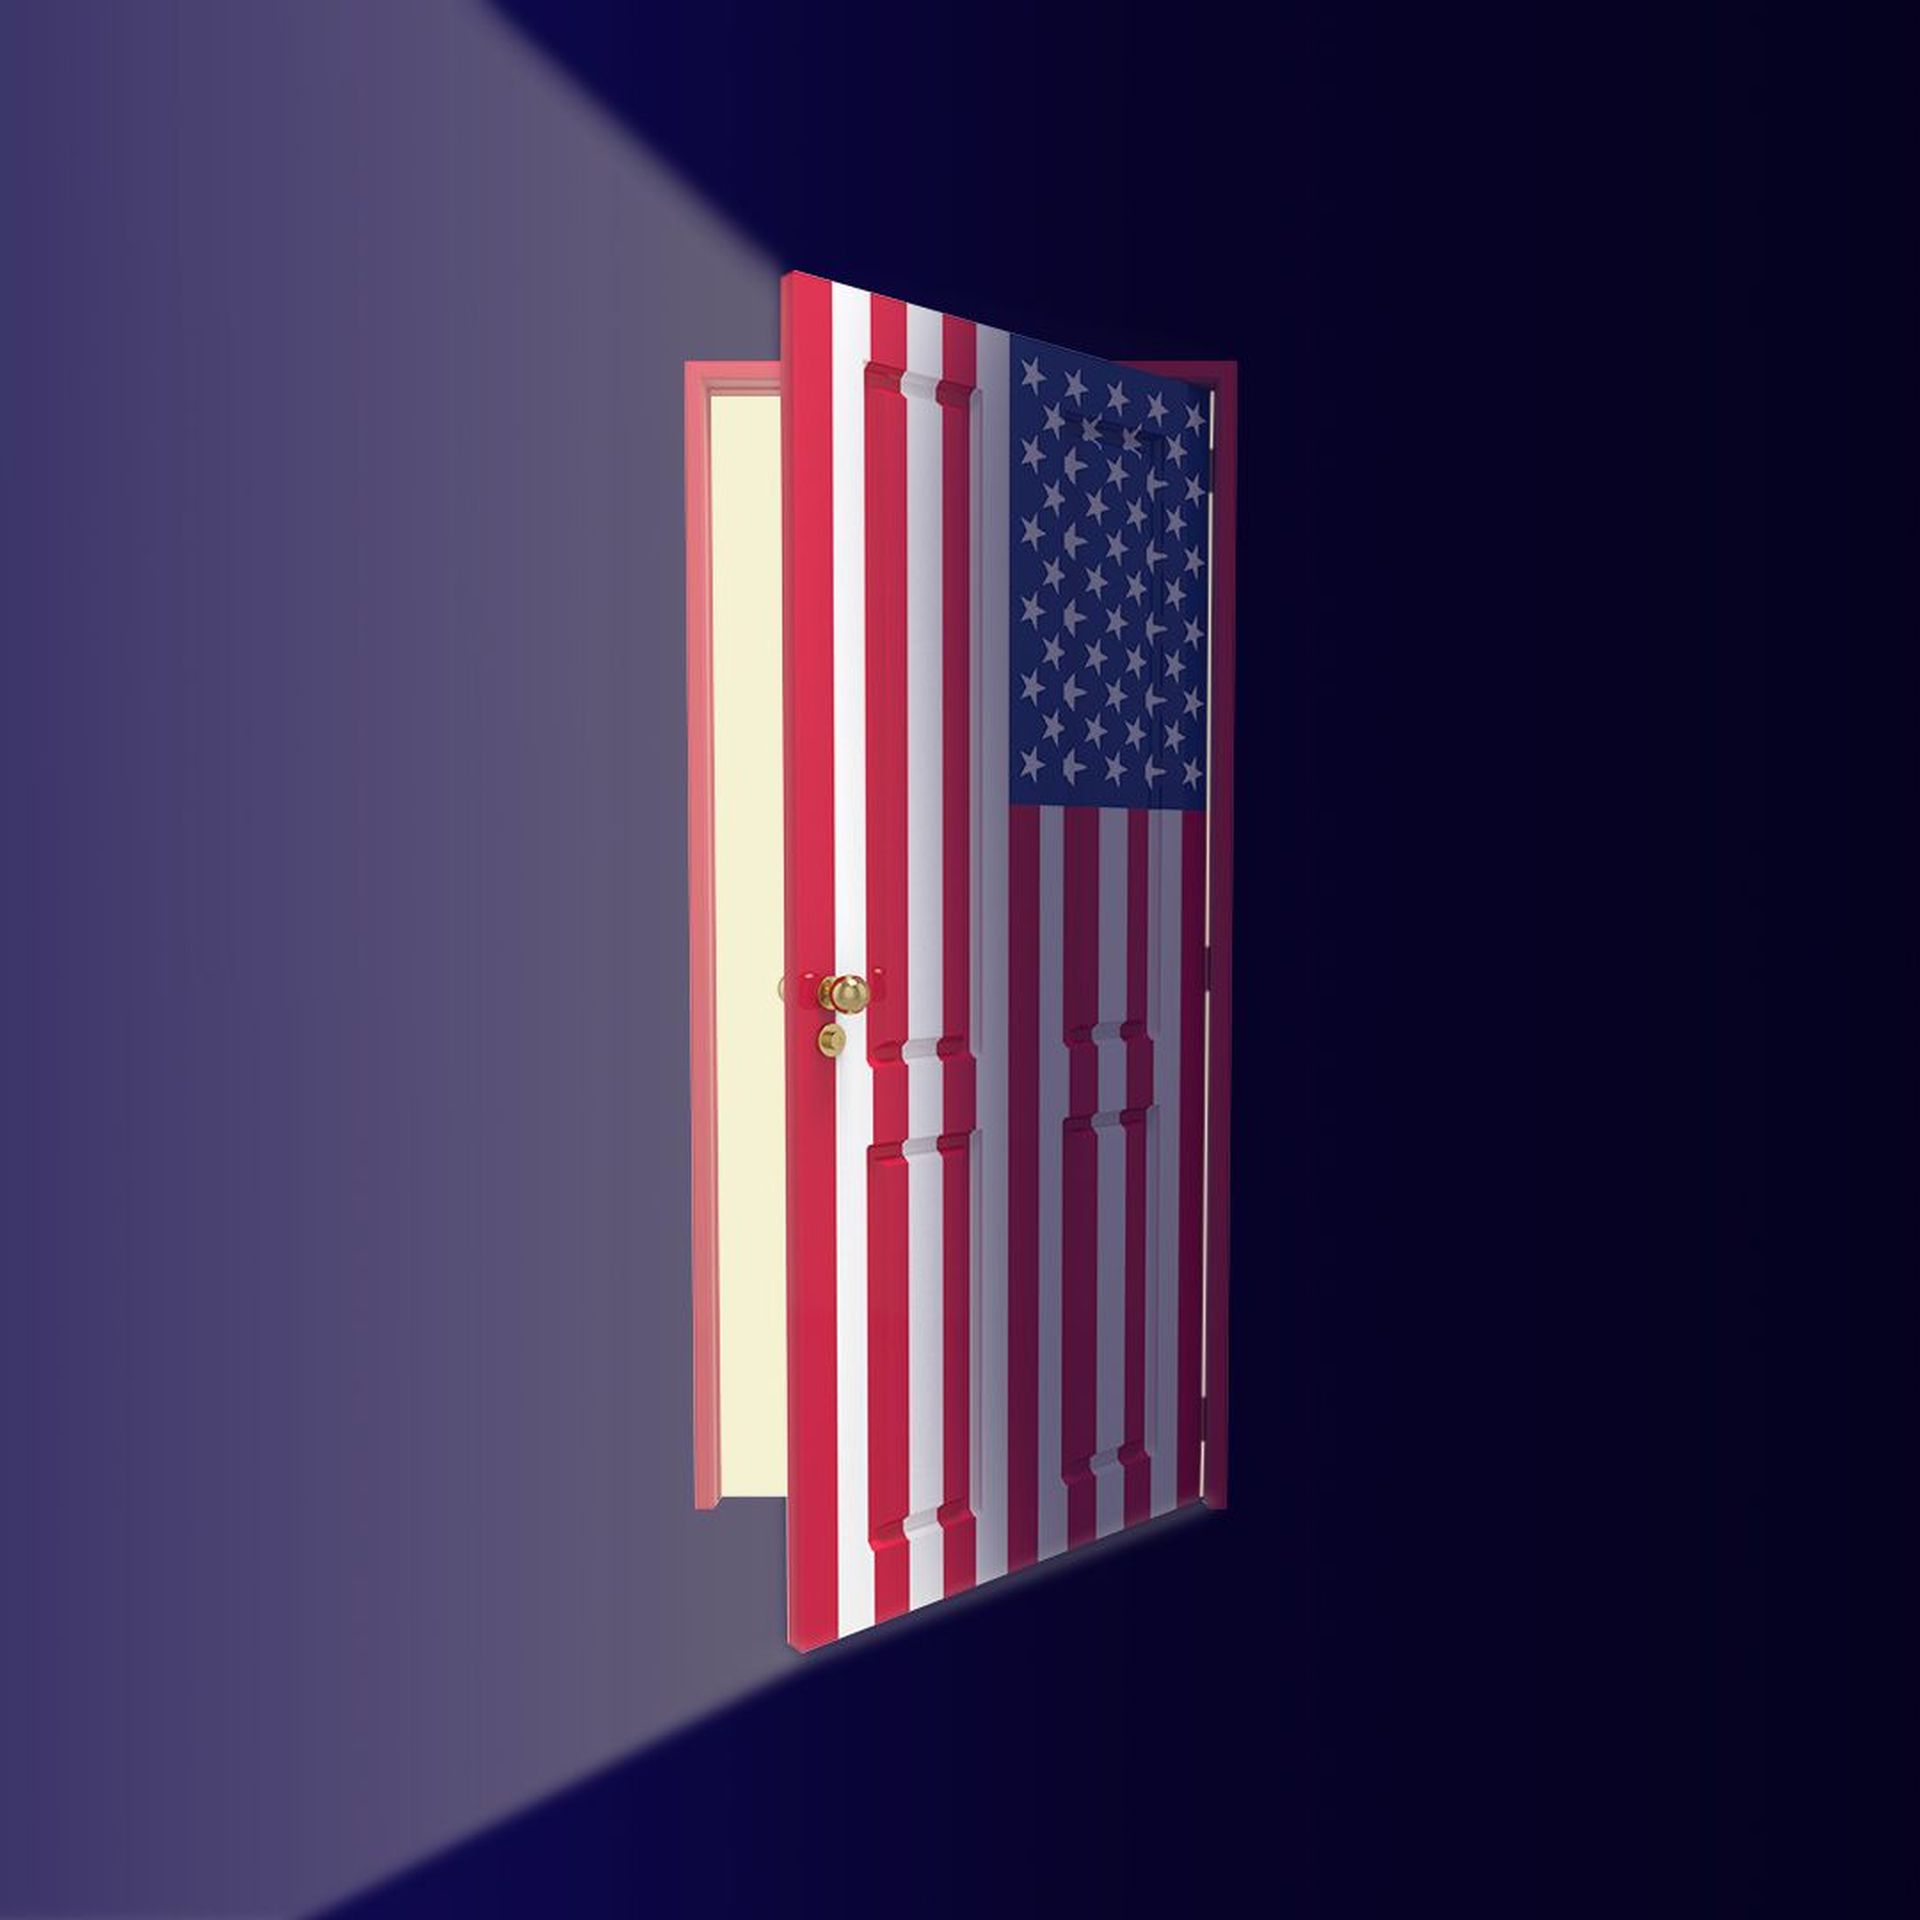 Illustration of a door made of an American flag opening with light pouring out.  